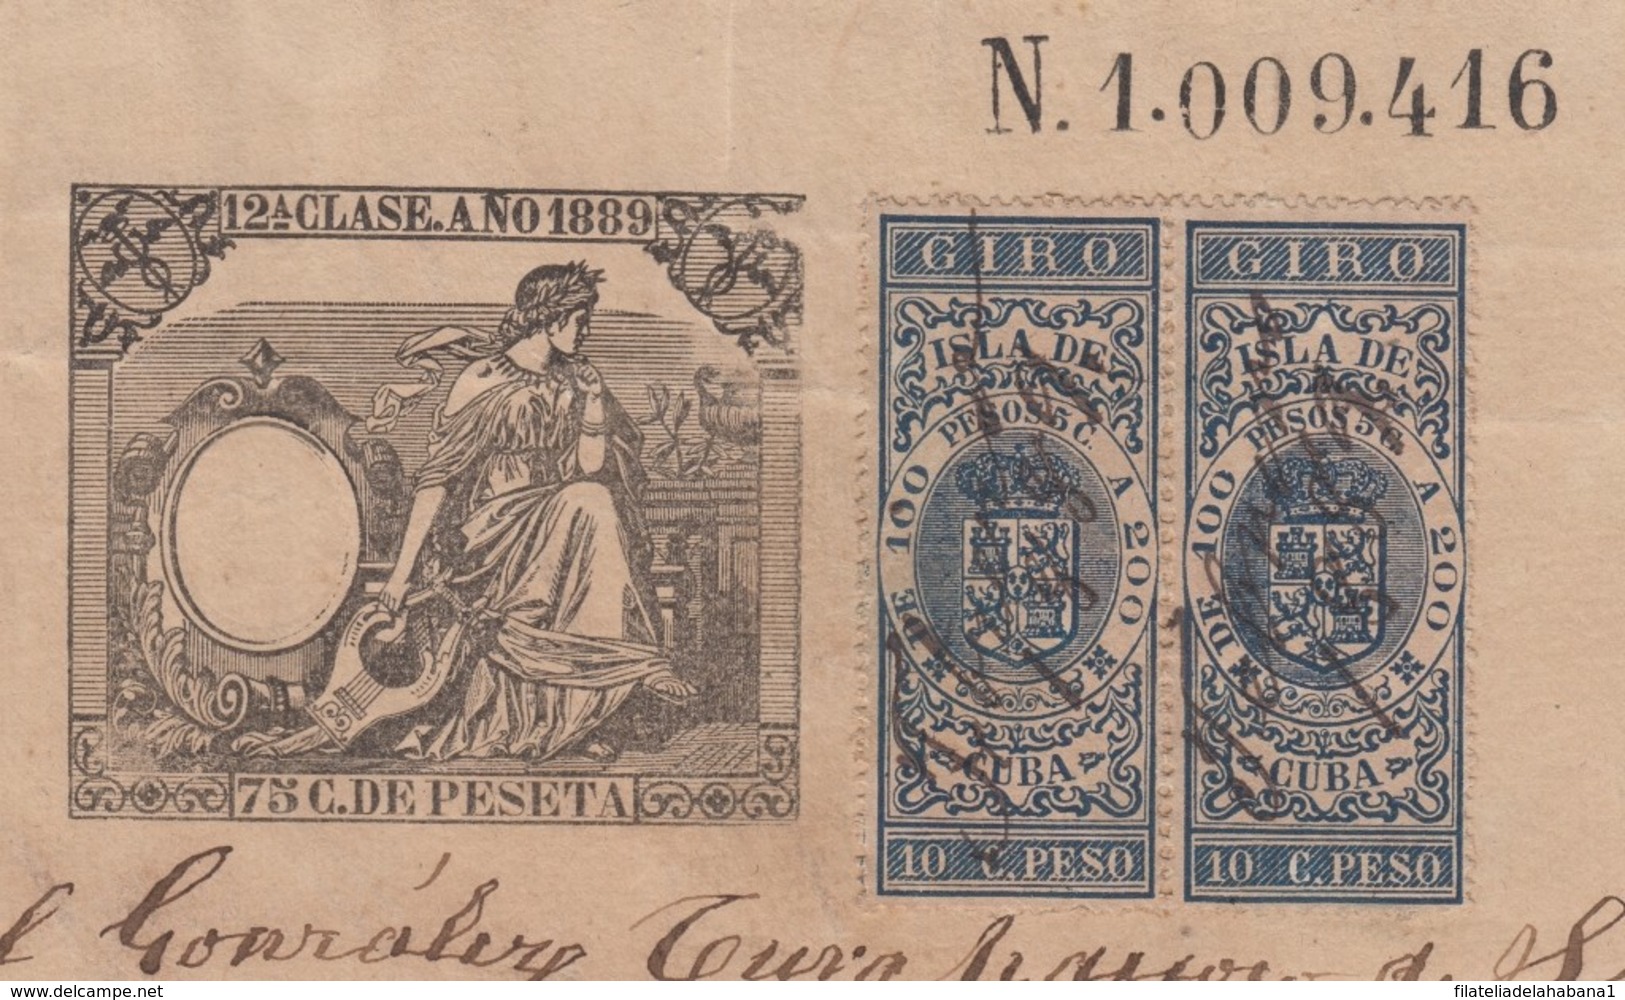 GIR-47 CUBA (LG1517) SPAIN ANT. REVENUE 1889 SEALLED PAPER + GIROS STAMPS. - Postage Due